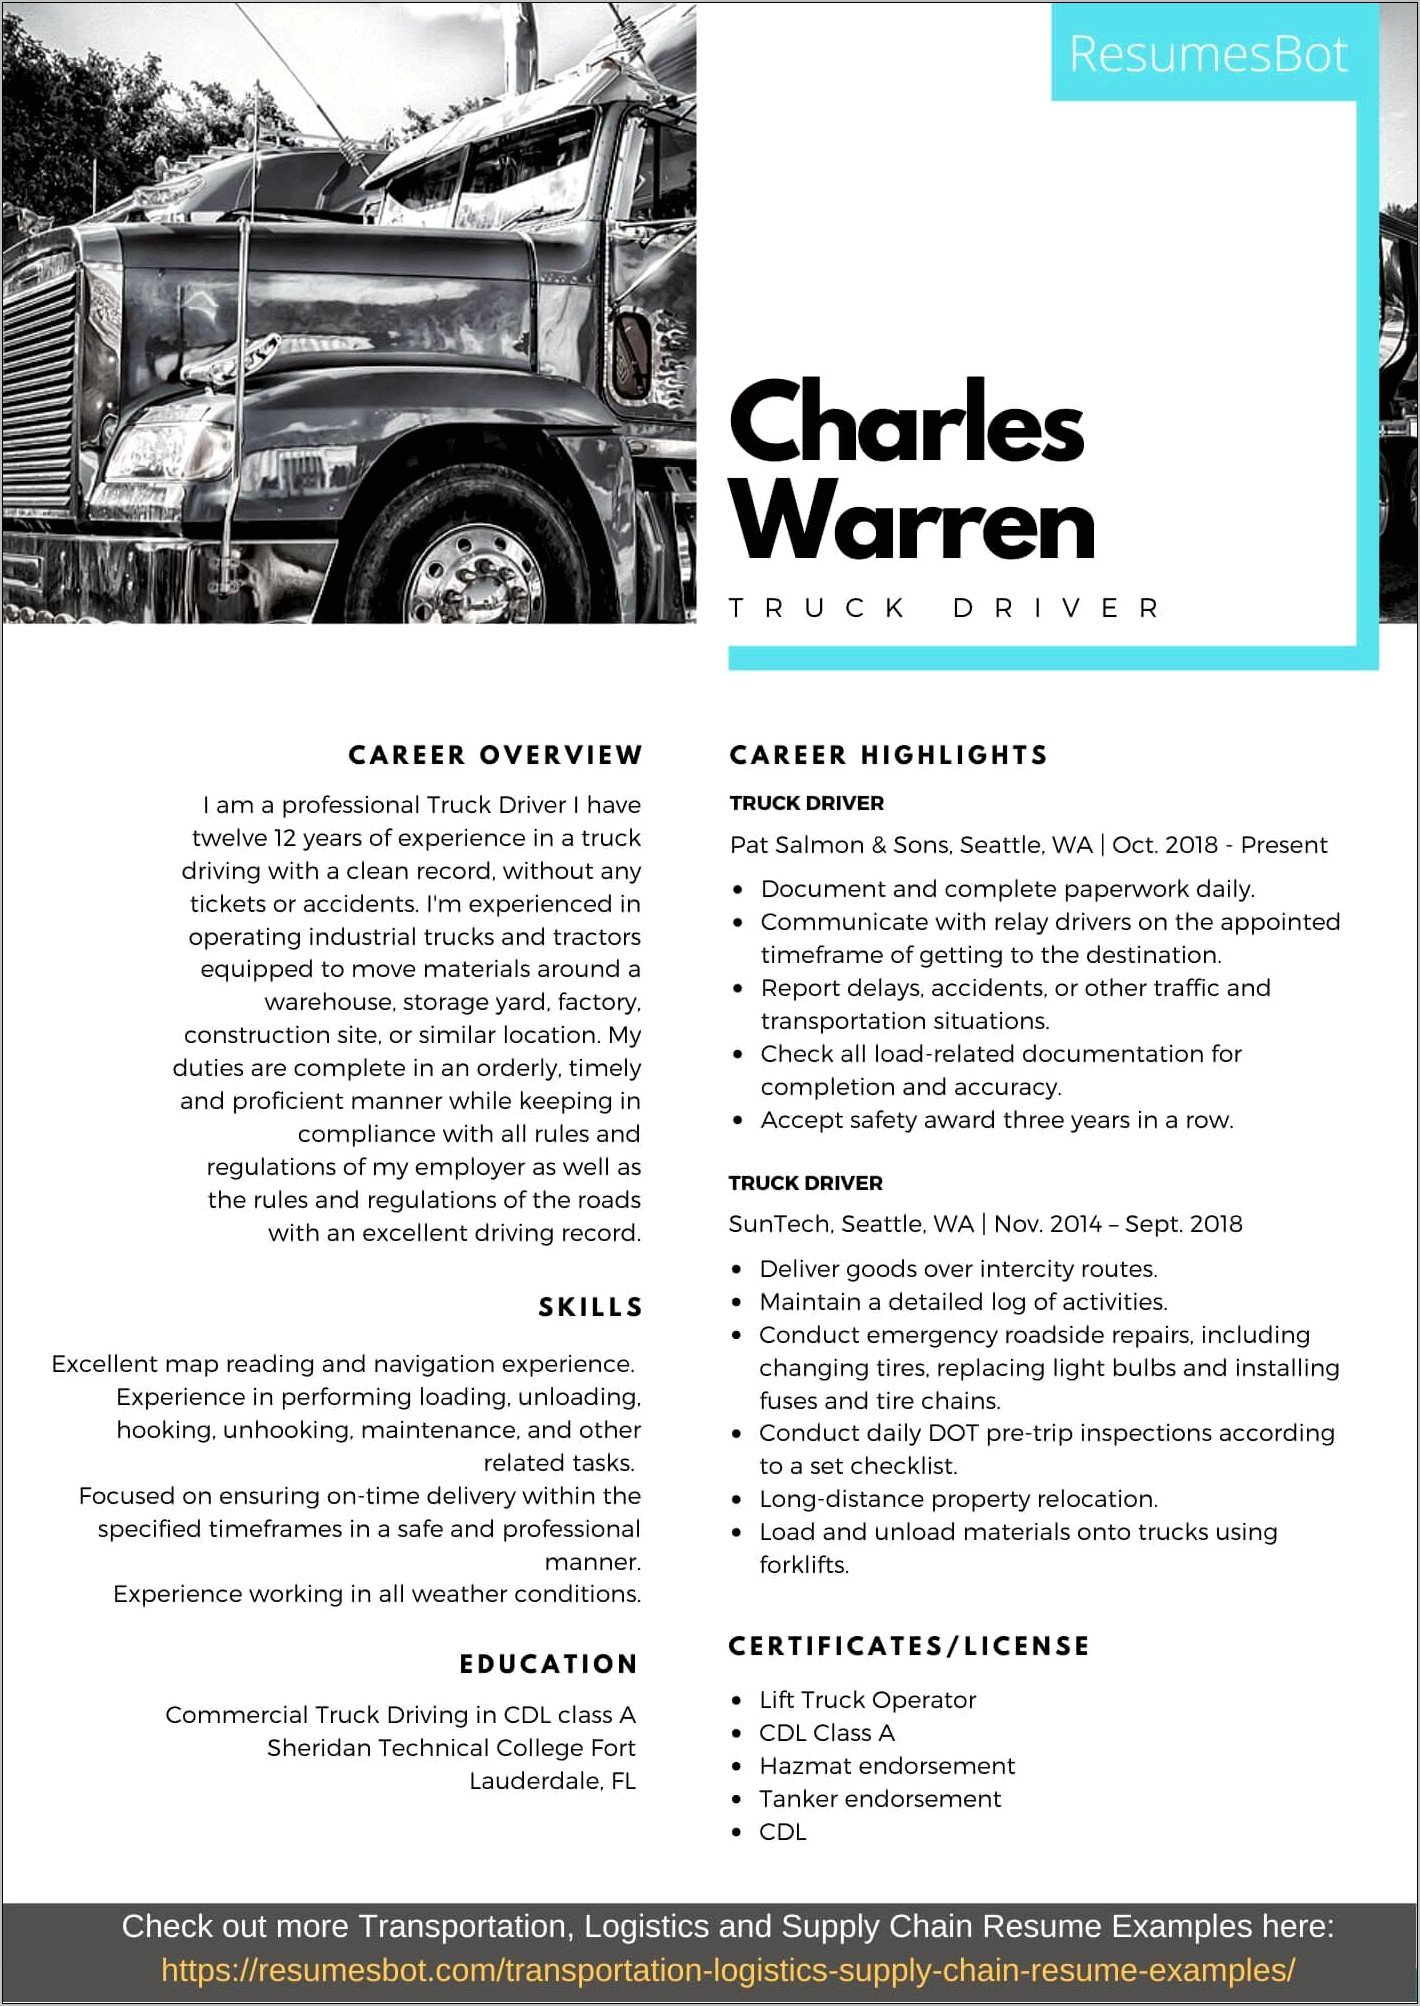 Resume Sample Free New Truck Driver